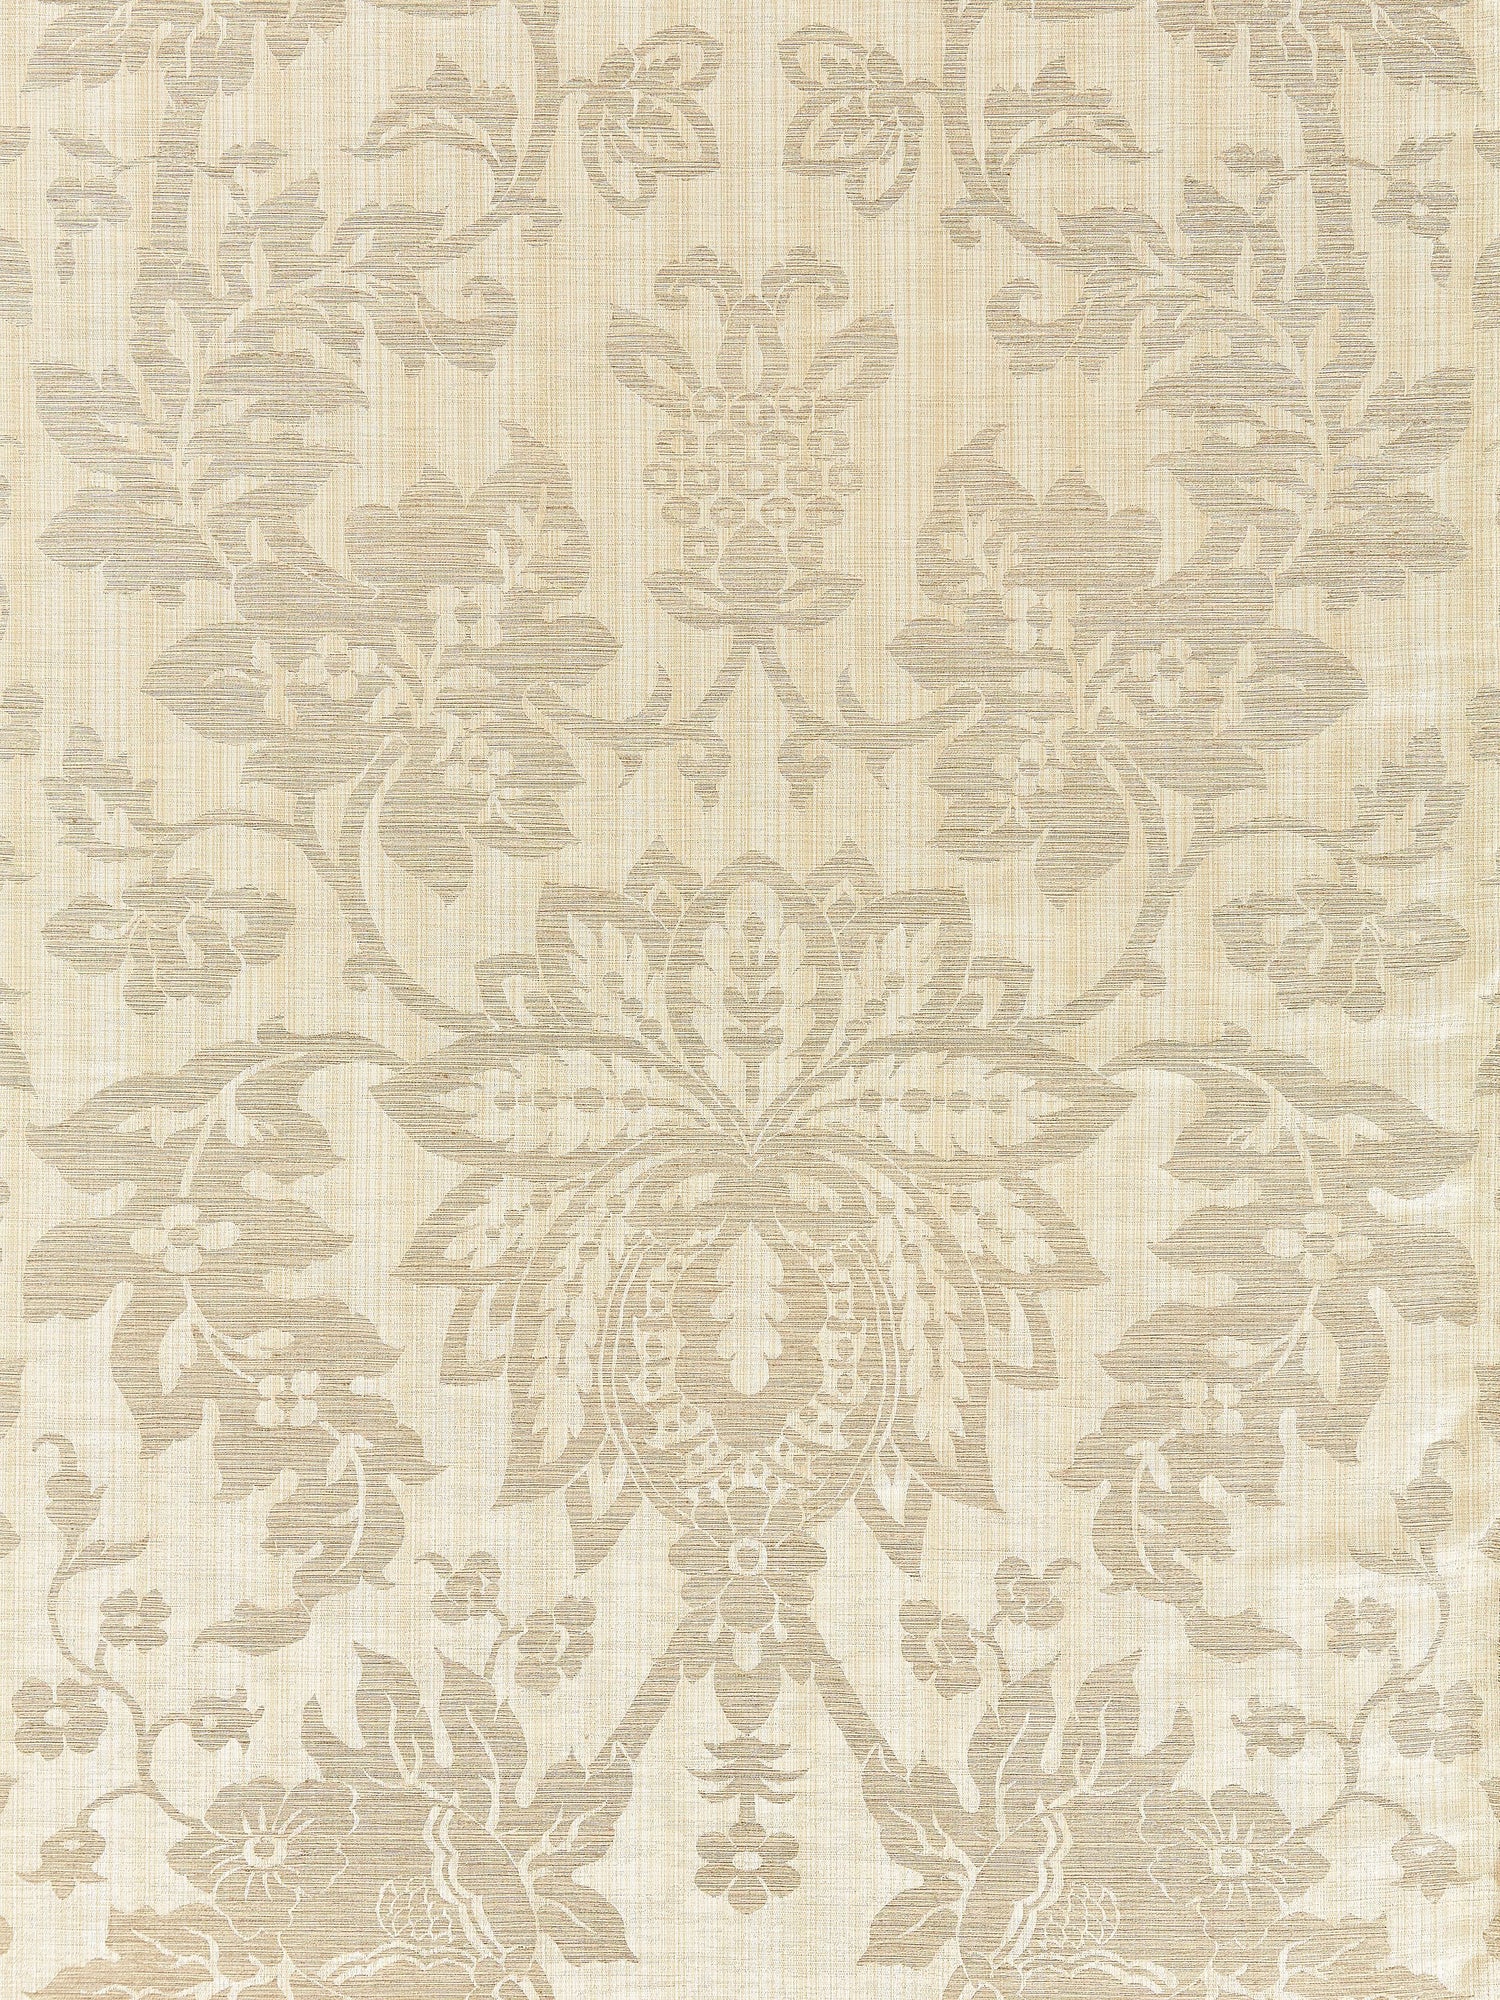 Metalline Damask fabric in champagne color - pattern number SC 000127136 - by Scalamandre in the Scalamandre Fabrics Book 1 collection